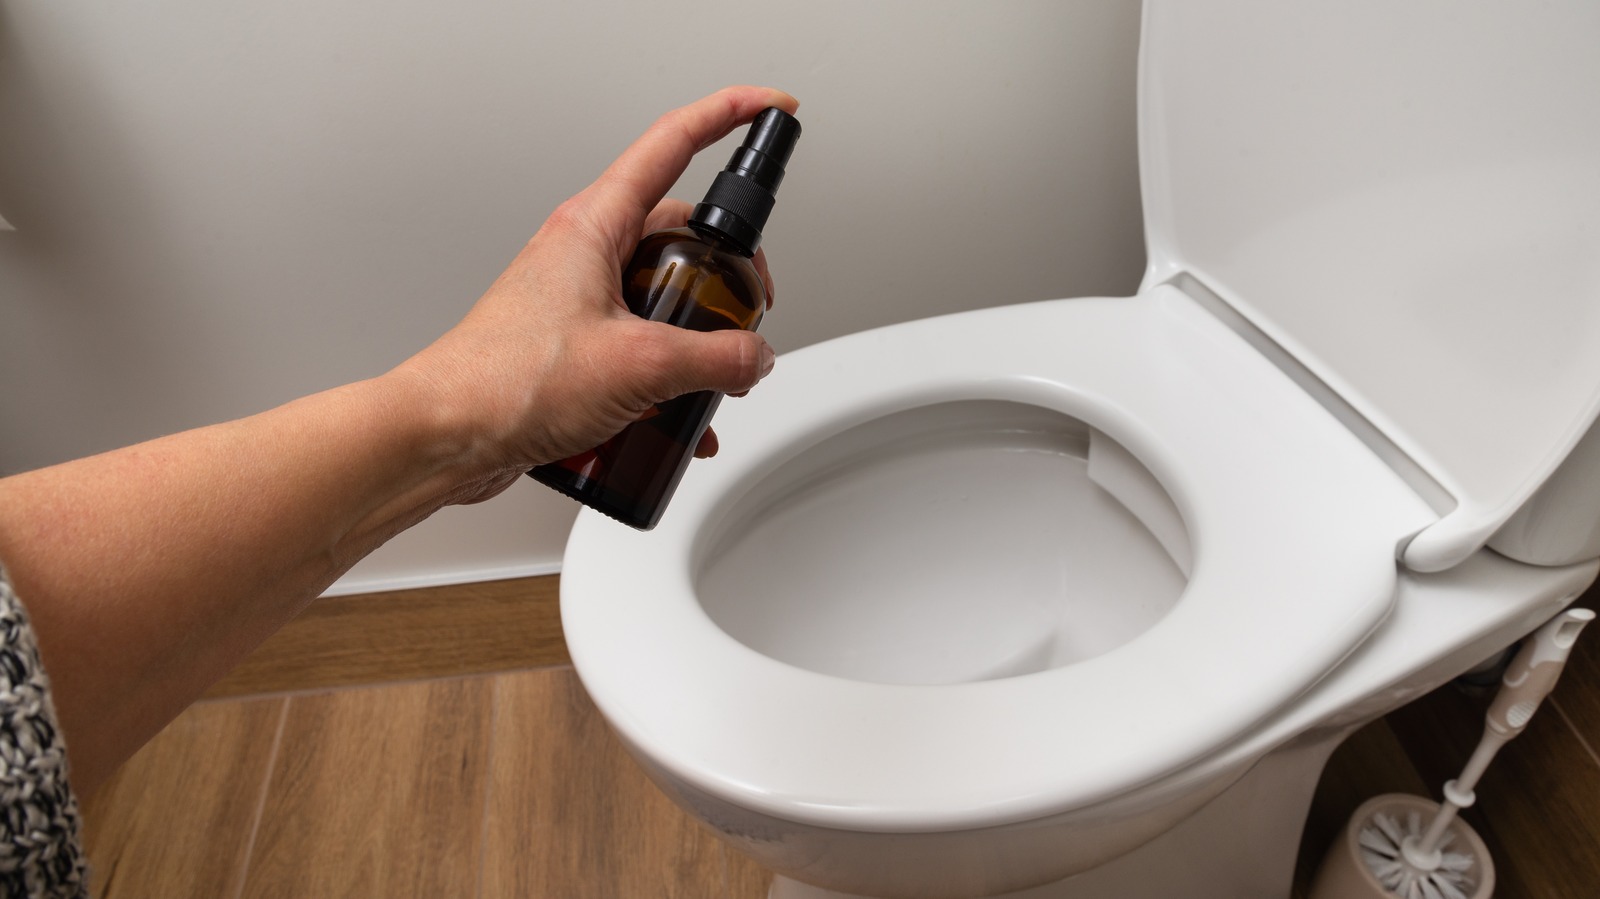 Popular Supplements That Can Make Your Poop Even Smellier – Health Digest